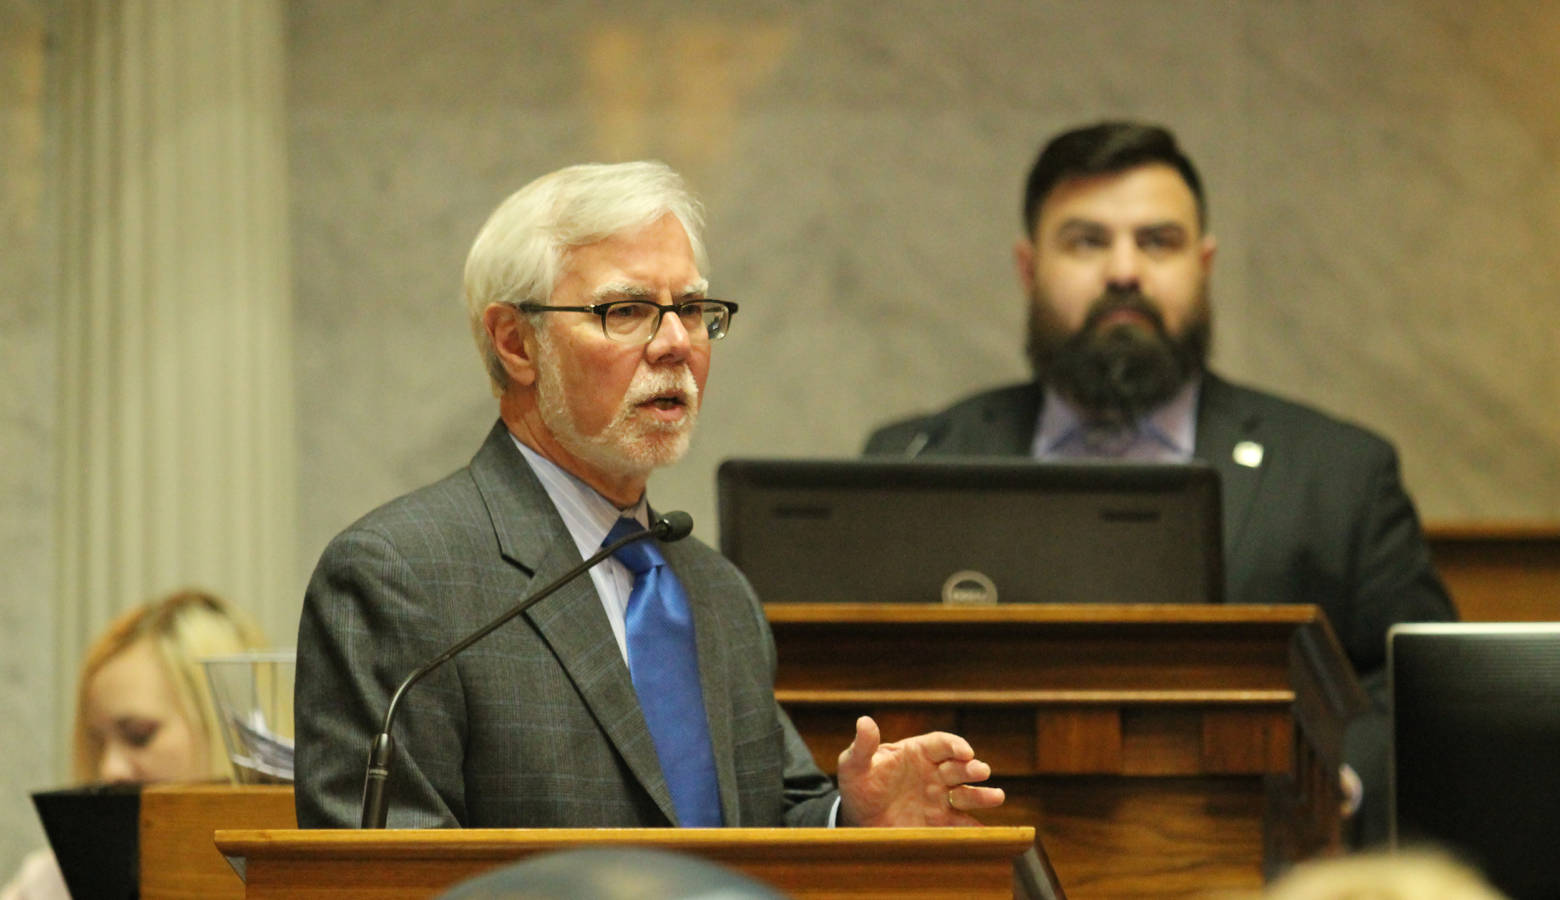 Senate Minority Leader Tim Lanane (D-Anderson) says more work on redistricting wouldn't be necessary if Republicans heeded a previous study committee's recommendation. (Lauren Chapman/IPB News)